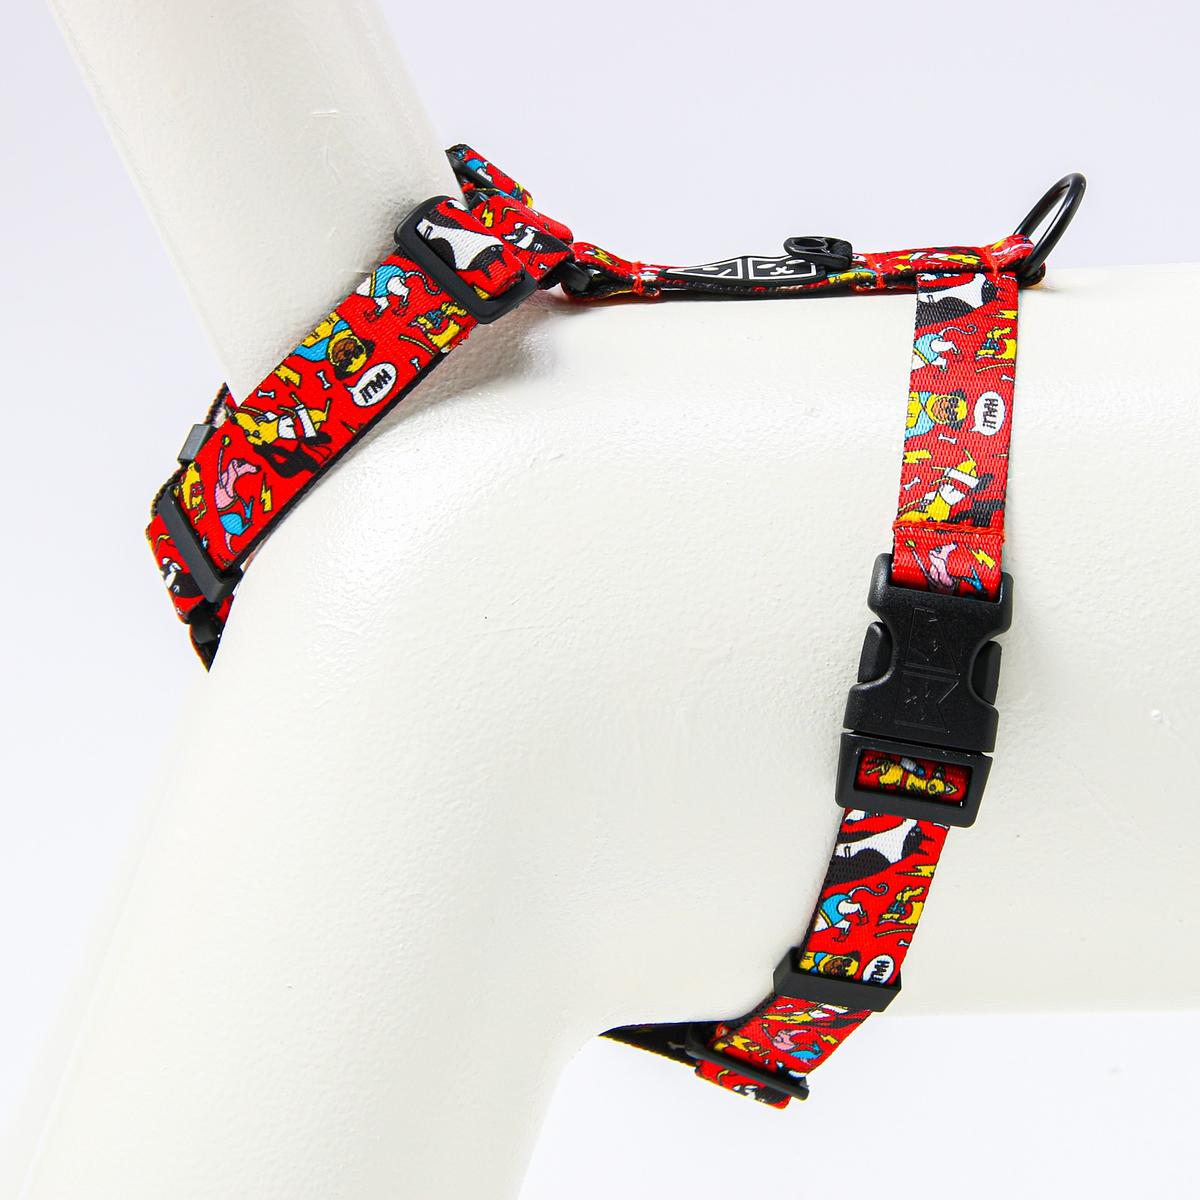 Stay-on guard harness "Woof for the better world"